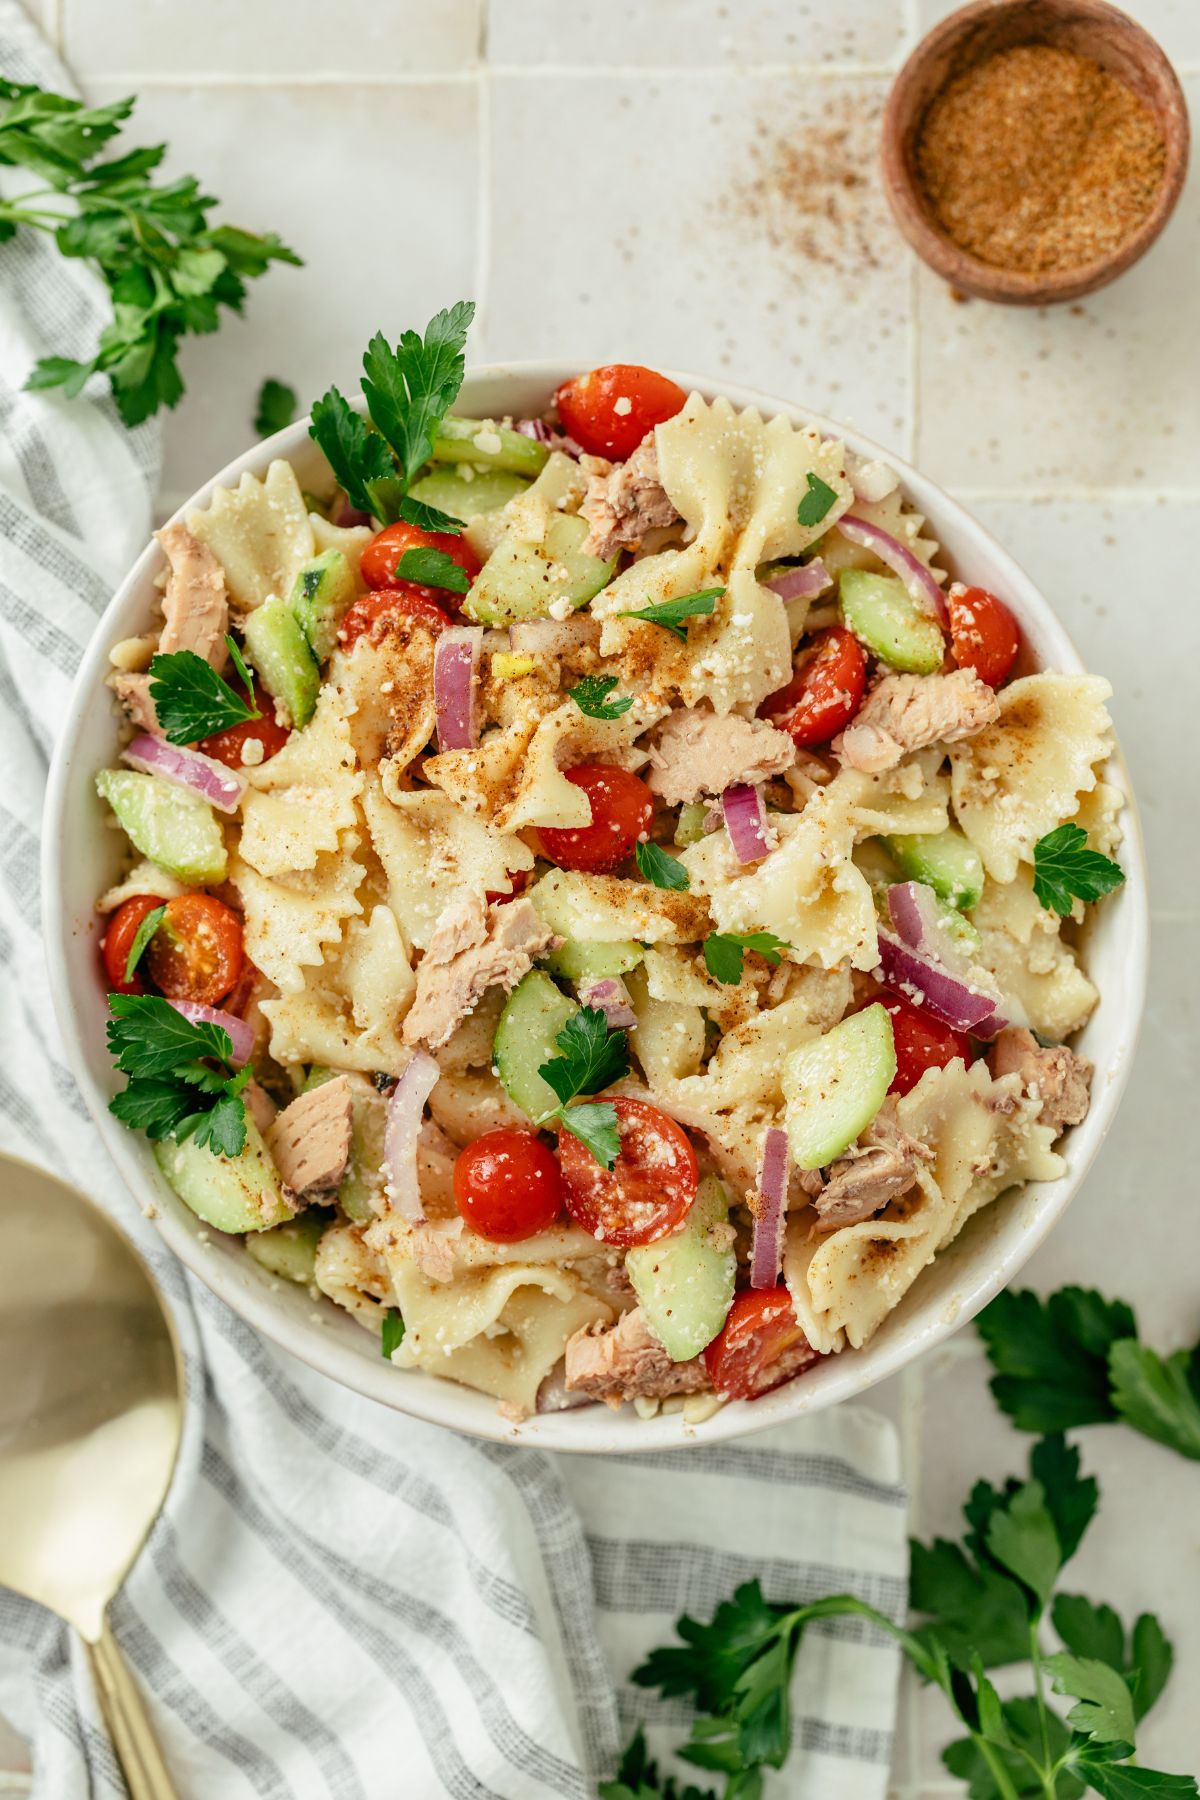 A colorful bowl of Canned Salmon Pasta Salad, featuring vibrant pasta, chunks of succulent salmon, and fresh vegetables, ready to tantalize taste buds